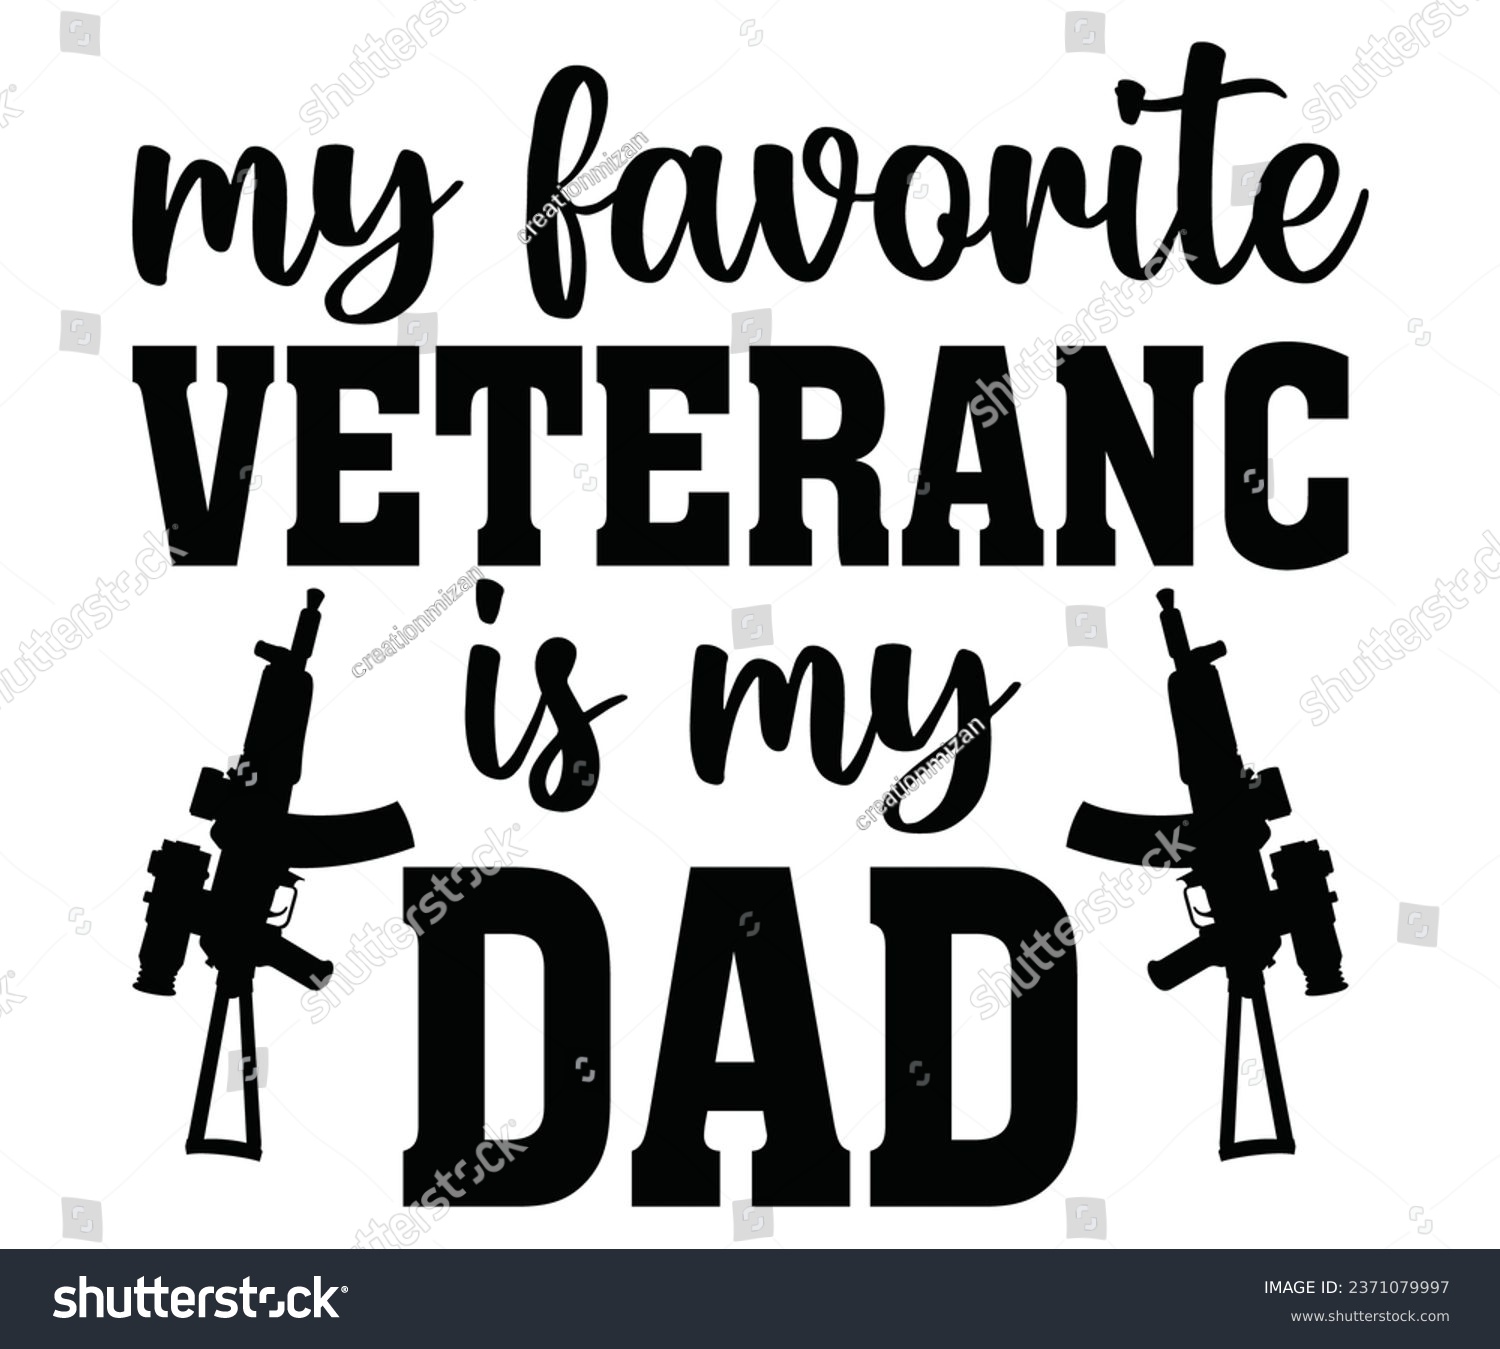 SVG of my favorite  veteranc is my dad 
 Svg,Veteran Clipart,Veteran Cutfile,Veteran Dad svg,Military svg,Military Dad svg,4th of July Clipart,Military Dad Gift Idea     
 svg